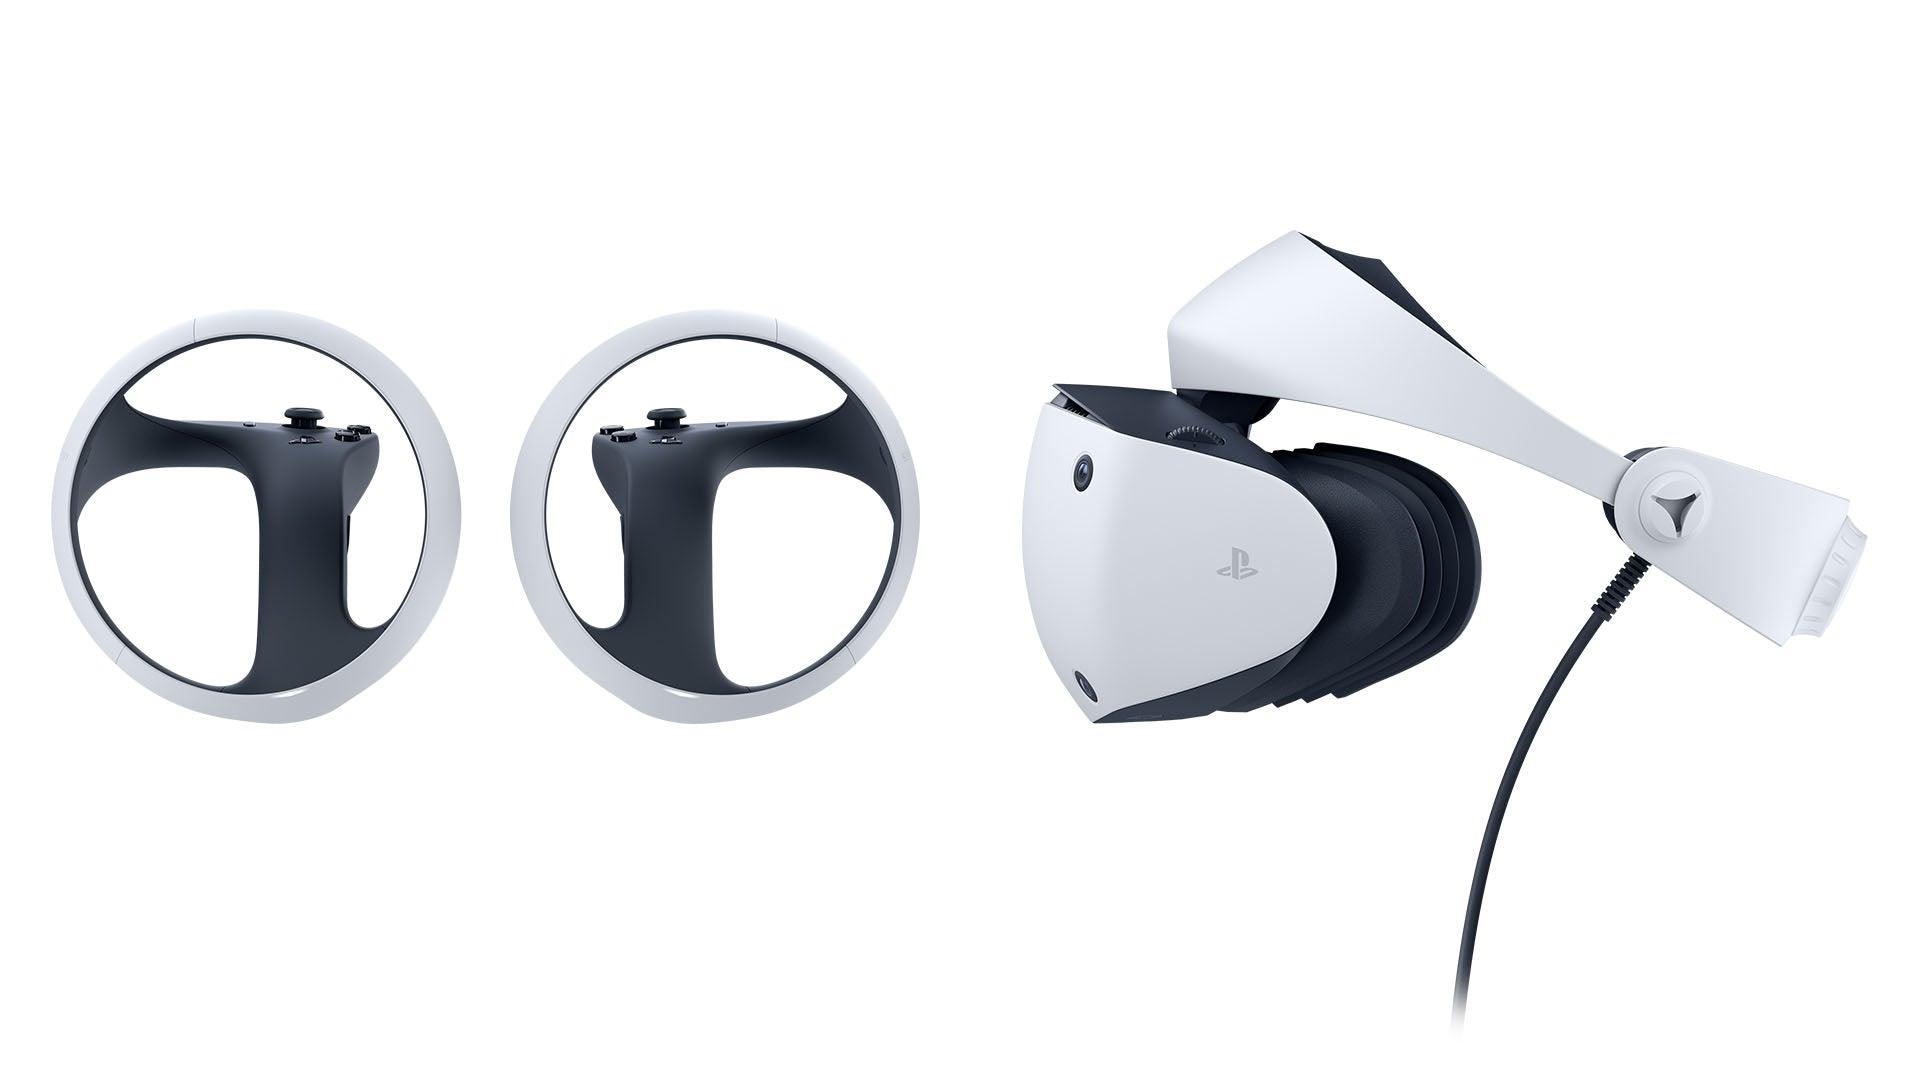 PlayStation VR2 Headset - Want a New Gadget